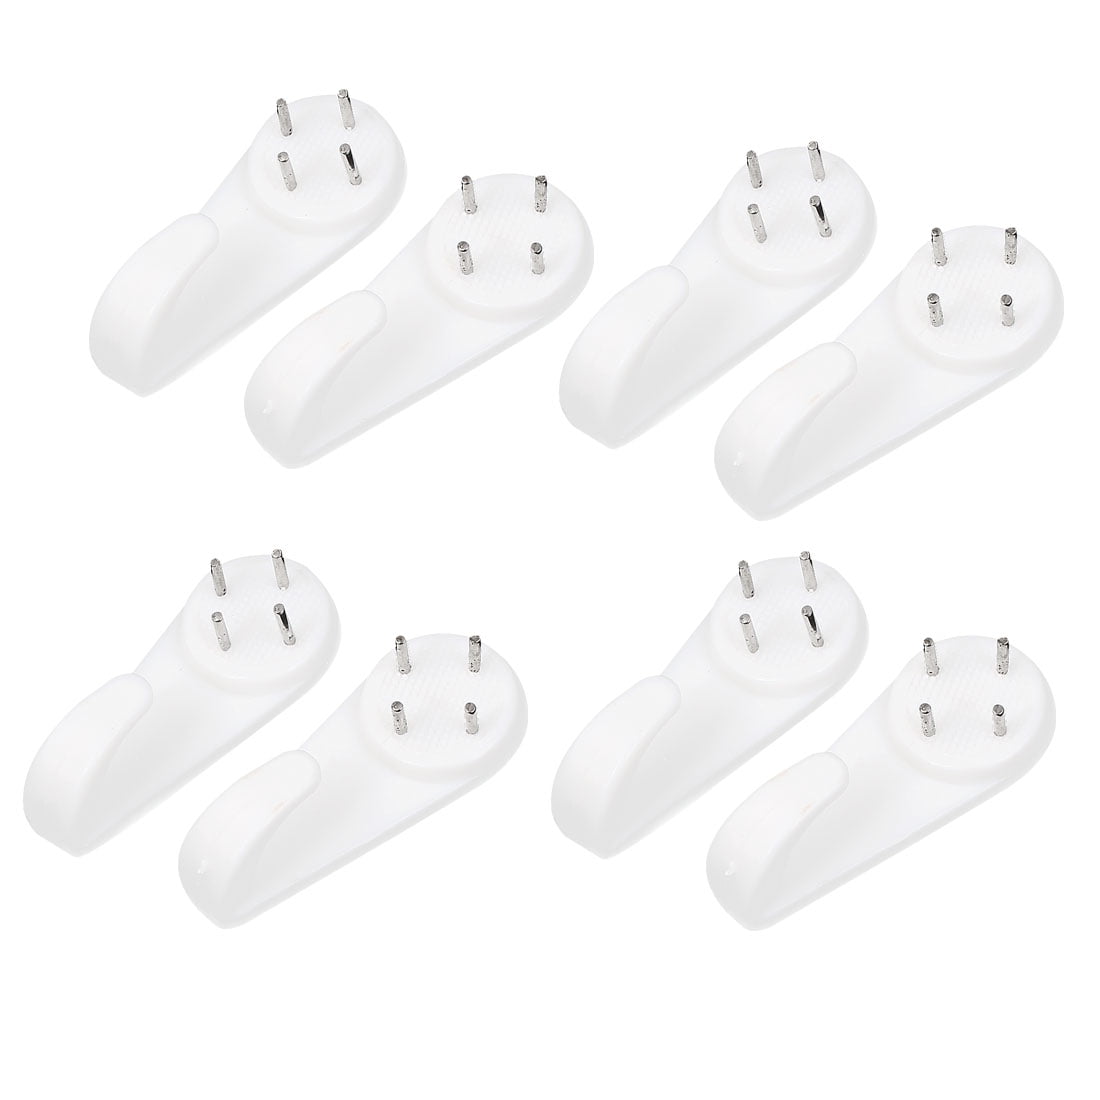 22 Pcs Plastic Wall Hooks with Nails And Screws Assorted Sizes White Hooks 